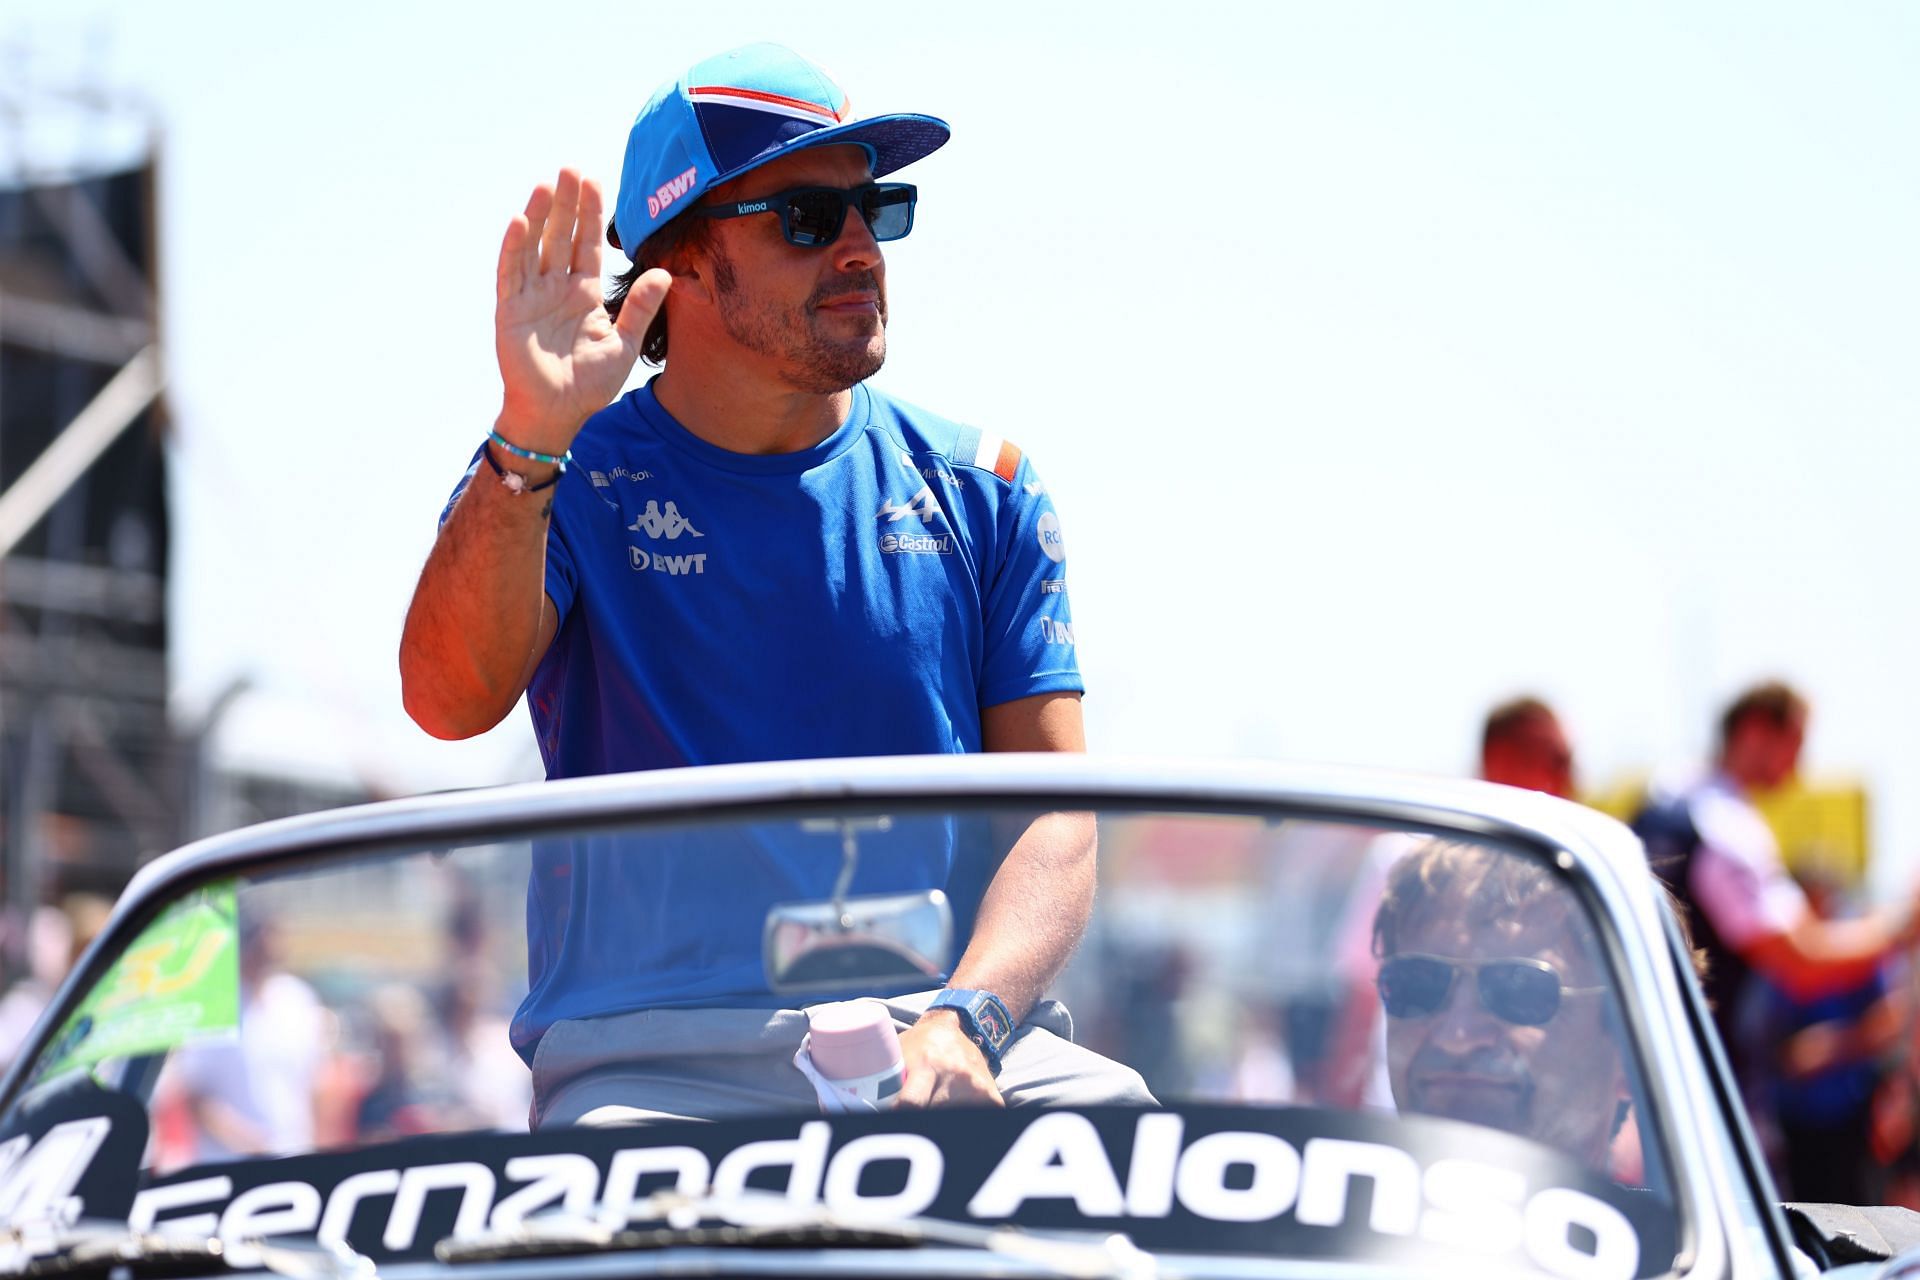 Alonso&#039;s partnership with Aston Martin is going to keep everyone intrigued